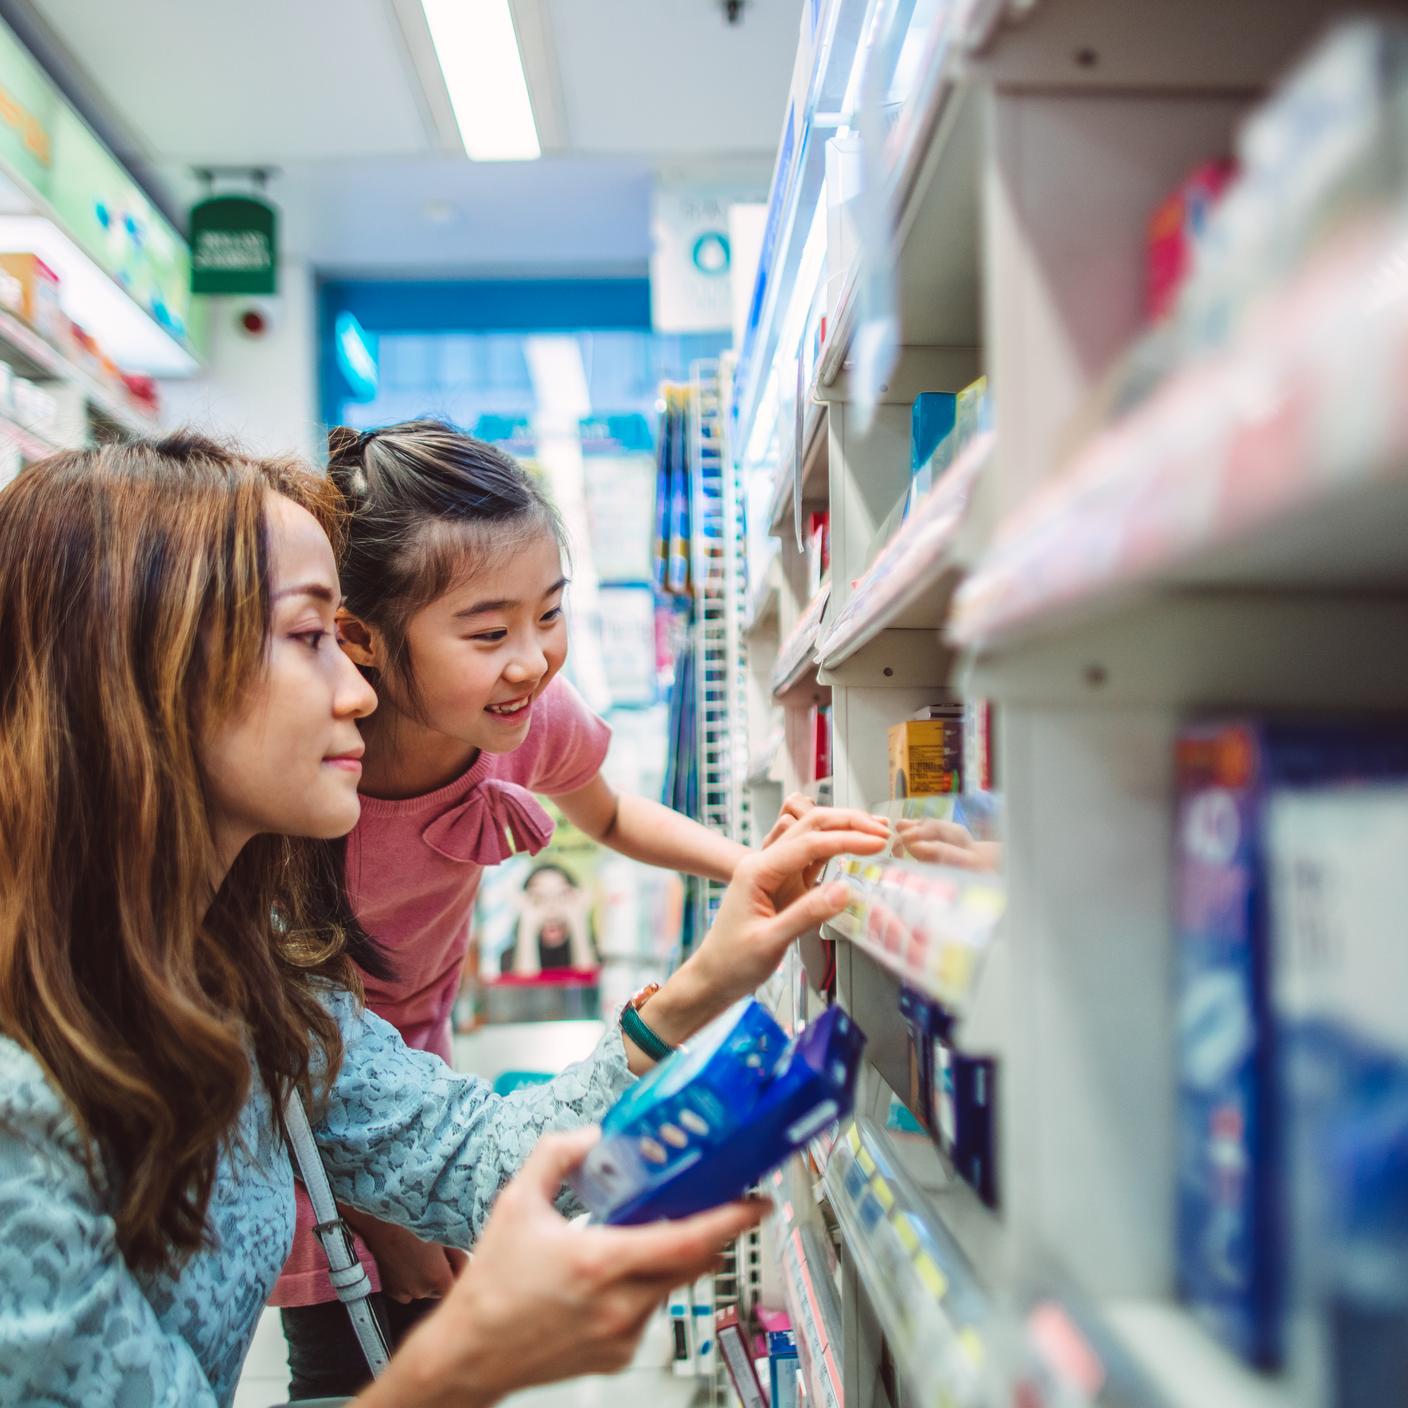 Future of trust - Pretty young mom shopping with her lovely daughter in a drugstore joyfully